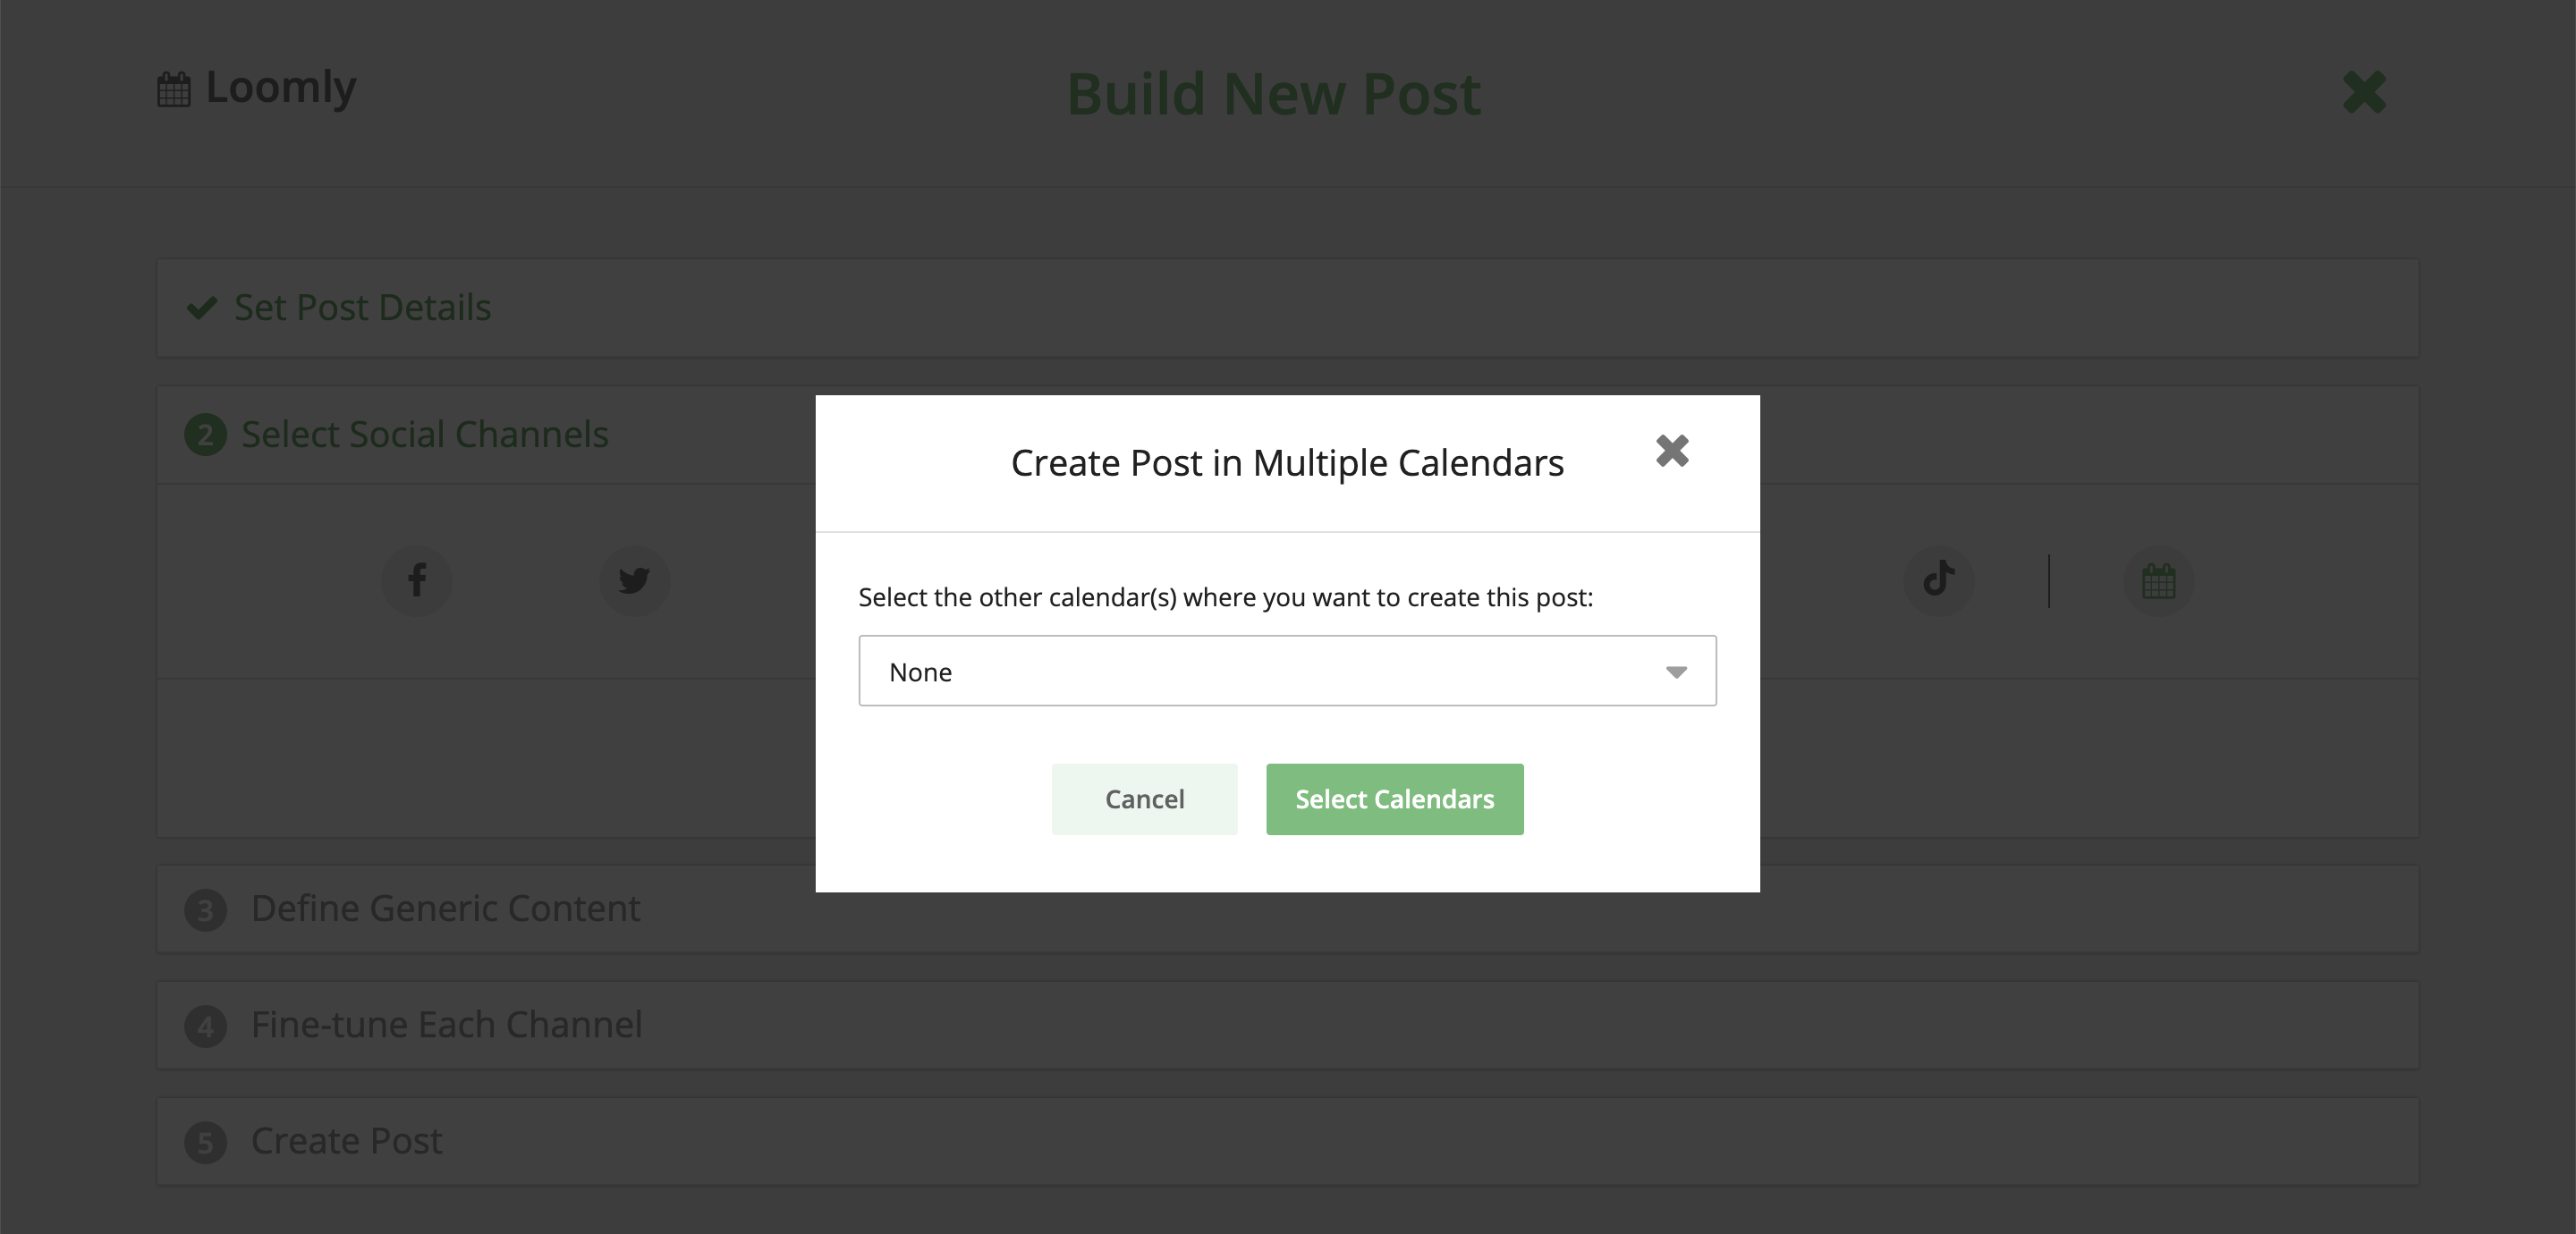 Publish posts to multiple calendars in Post Builder with Loomly Select calendars